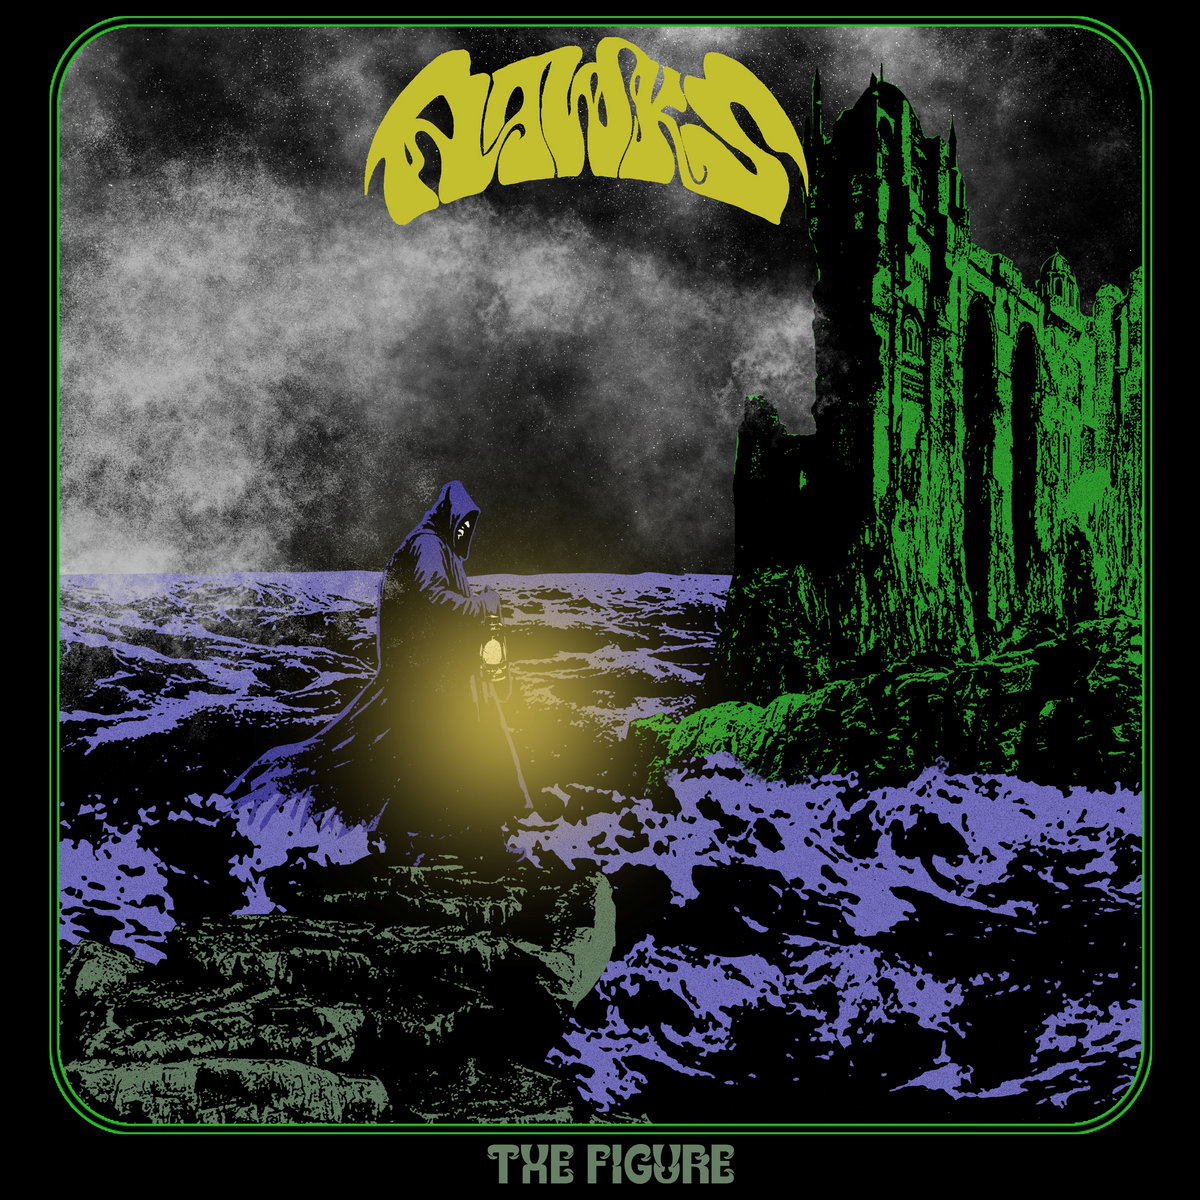 HOT TRACK: “The Figure” by AAWKS